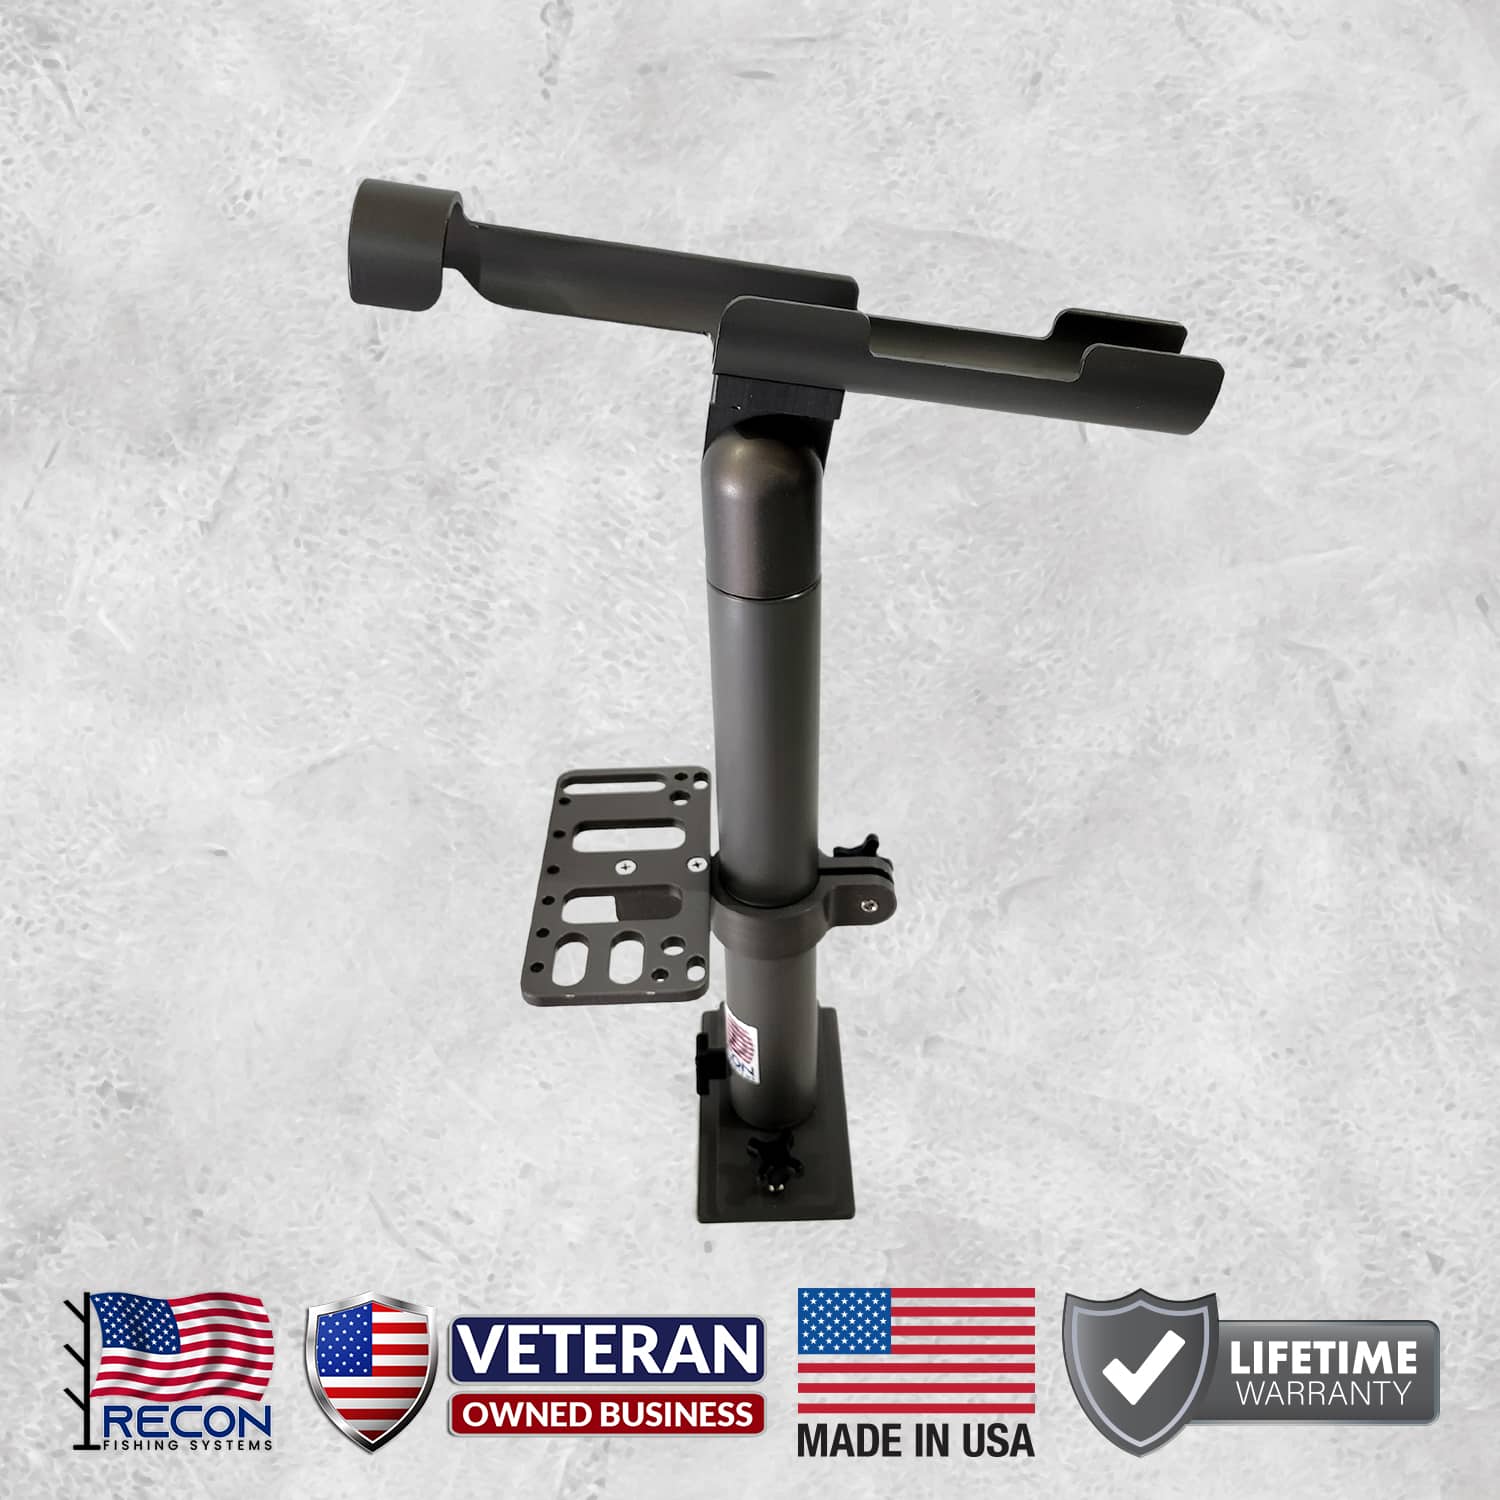 RECON Marine Tool Holder - Hard Coat Anodized (Color: Gunmetal Gray) without 6" Riser Tube Base but mounted on our 12" Rod Cradle with Riser - Hard Coat Anodized (Color: Gunmetal Gray) which is sold separately.